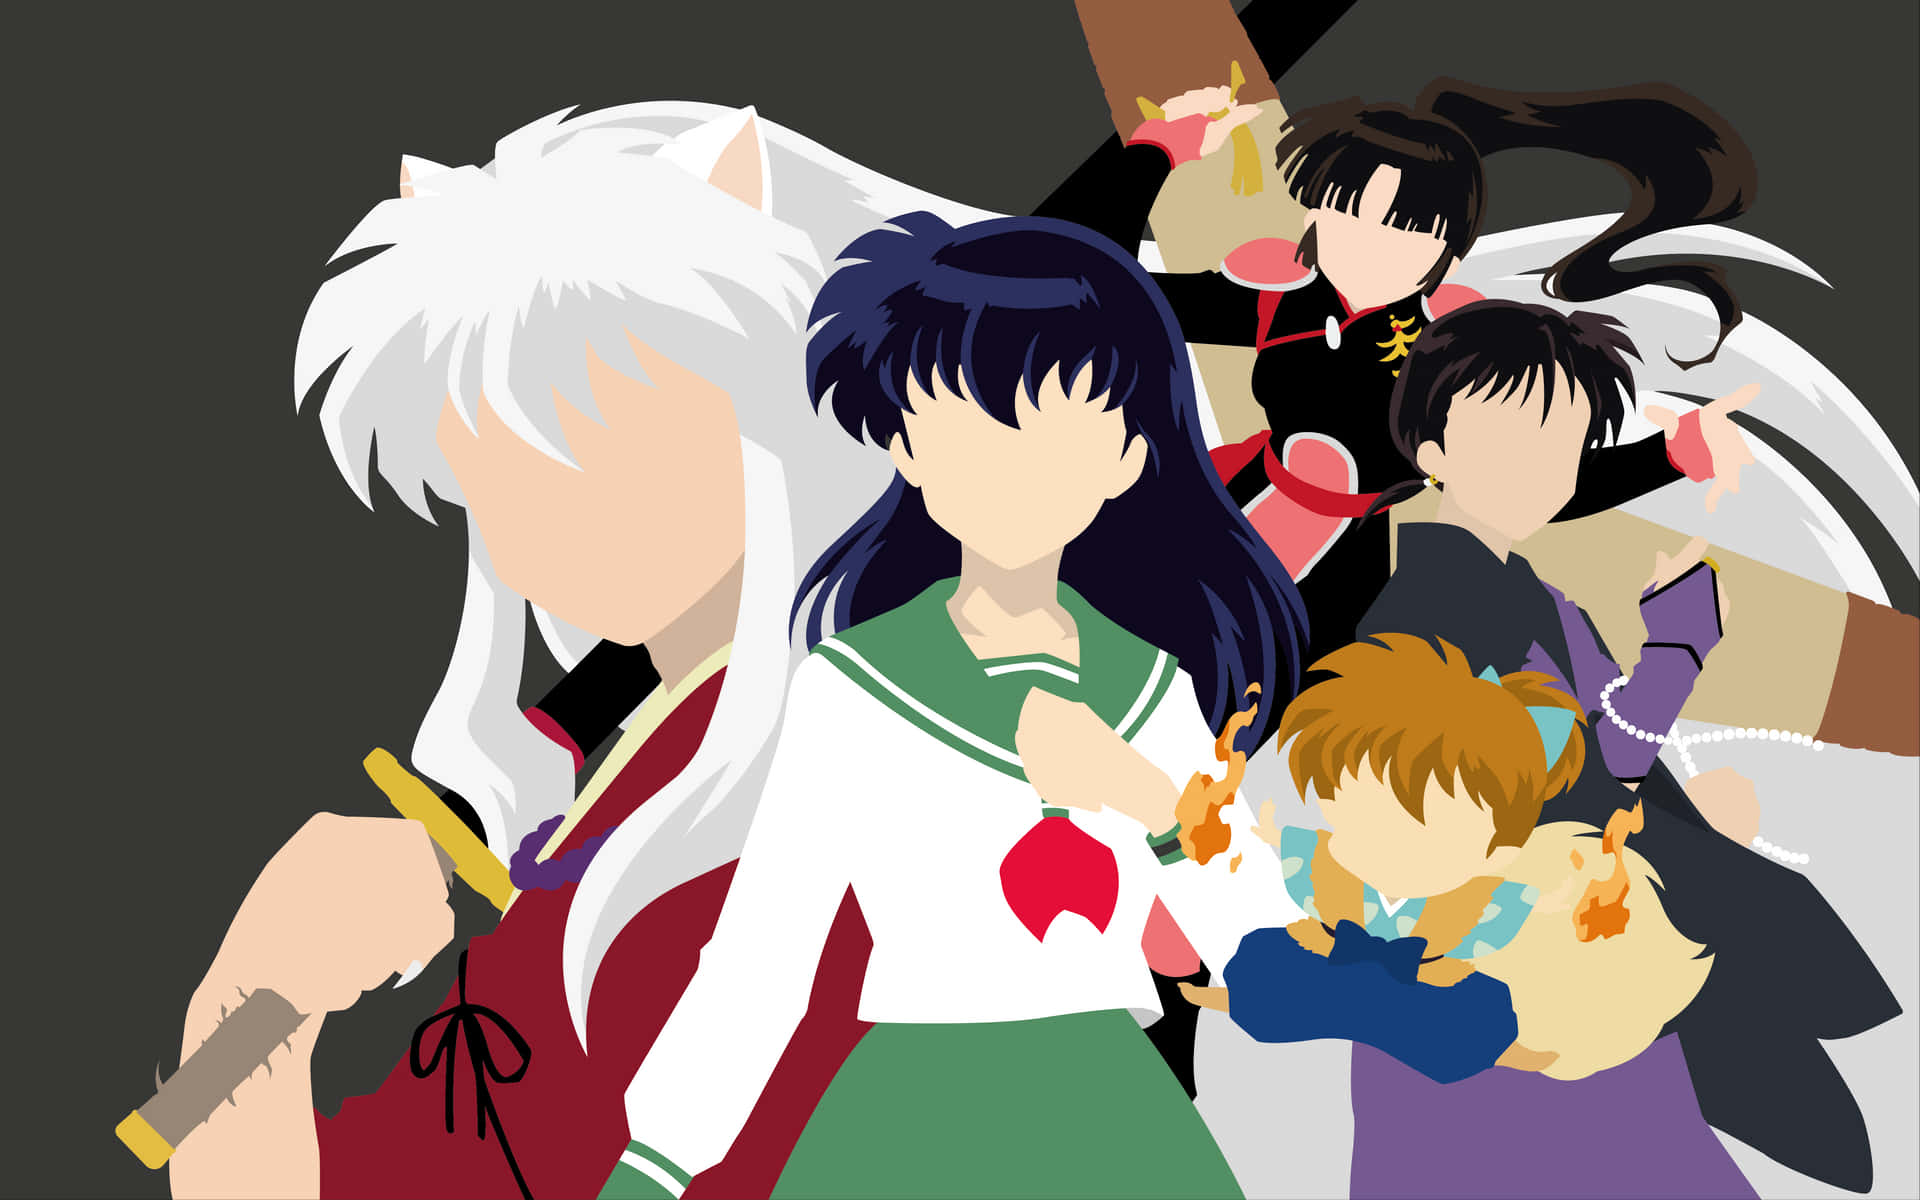 Inuyasha on a quest to save his friends in ancient Japan!